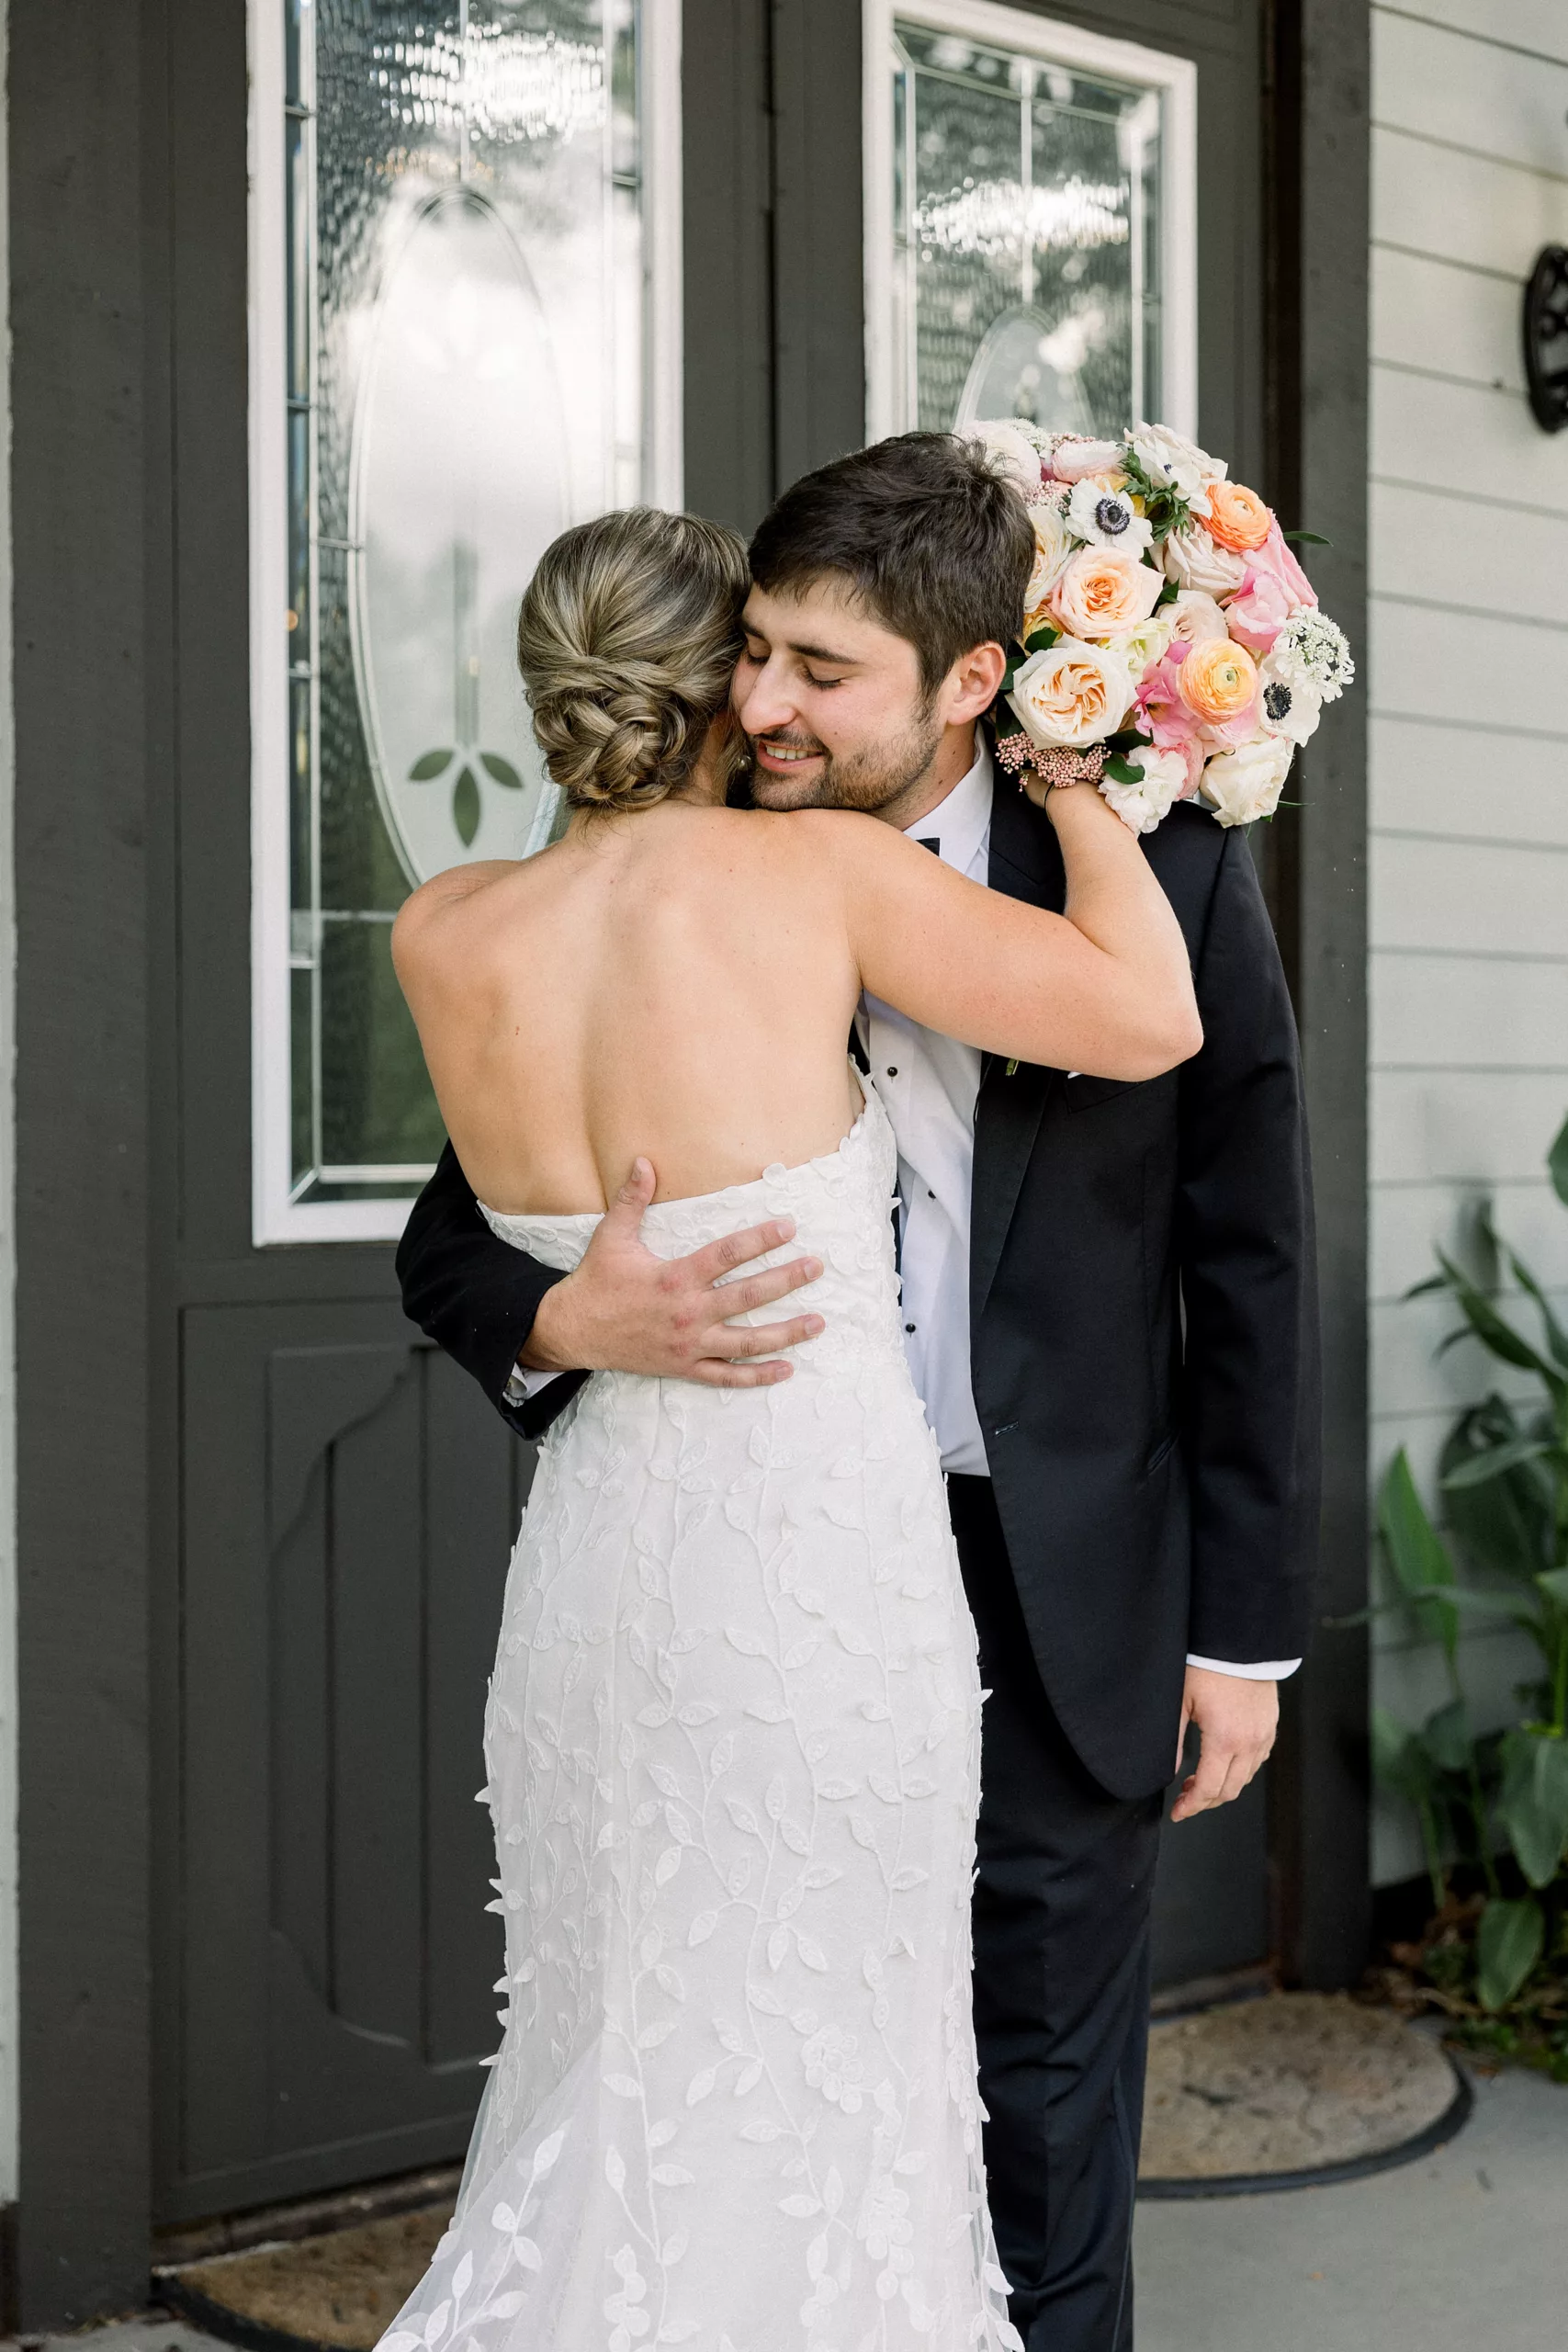 A groom hugs his bride on a porch as he sees her dress for the first time